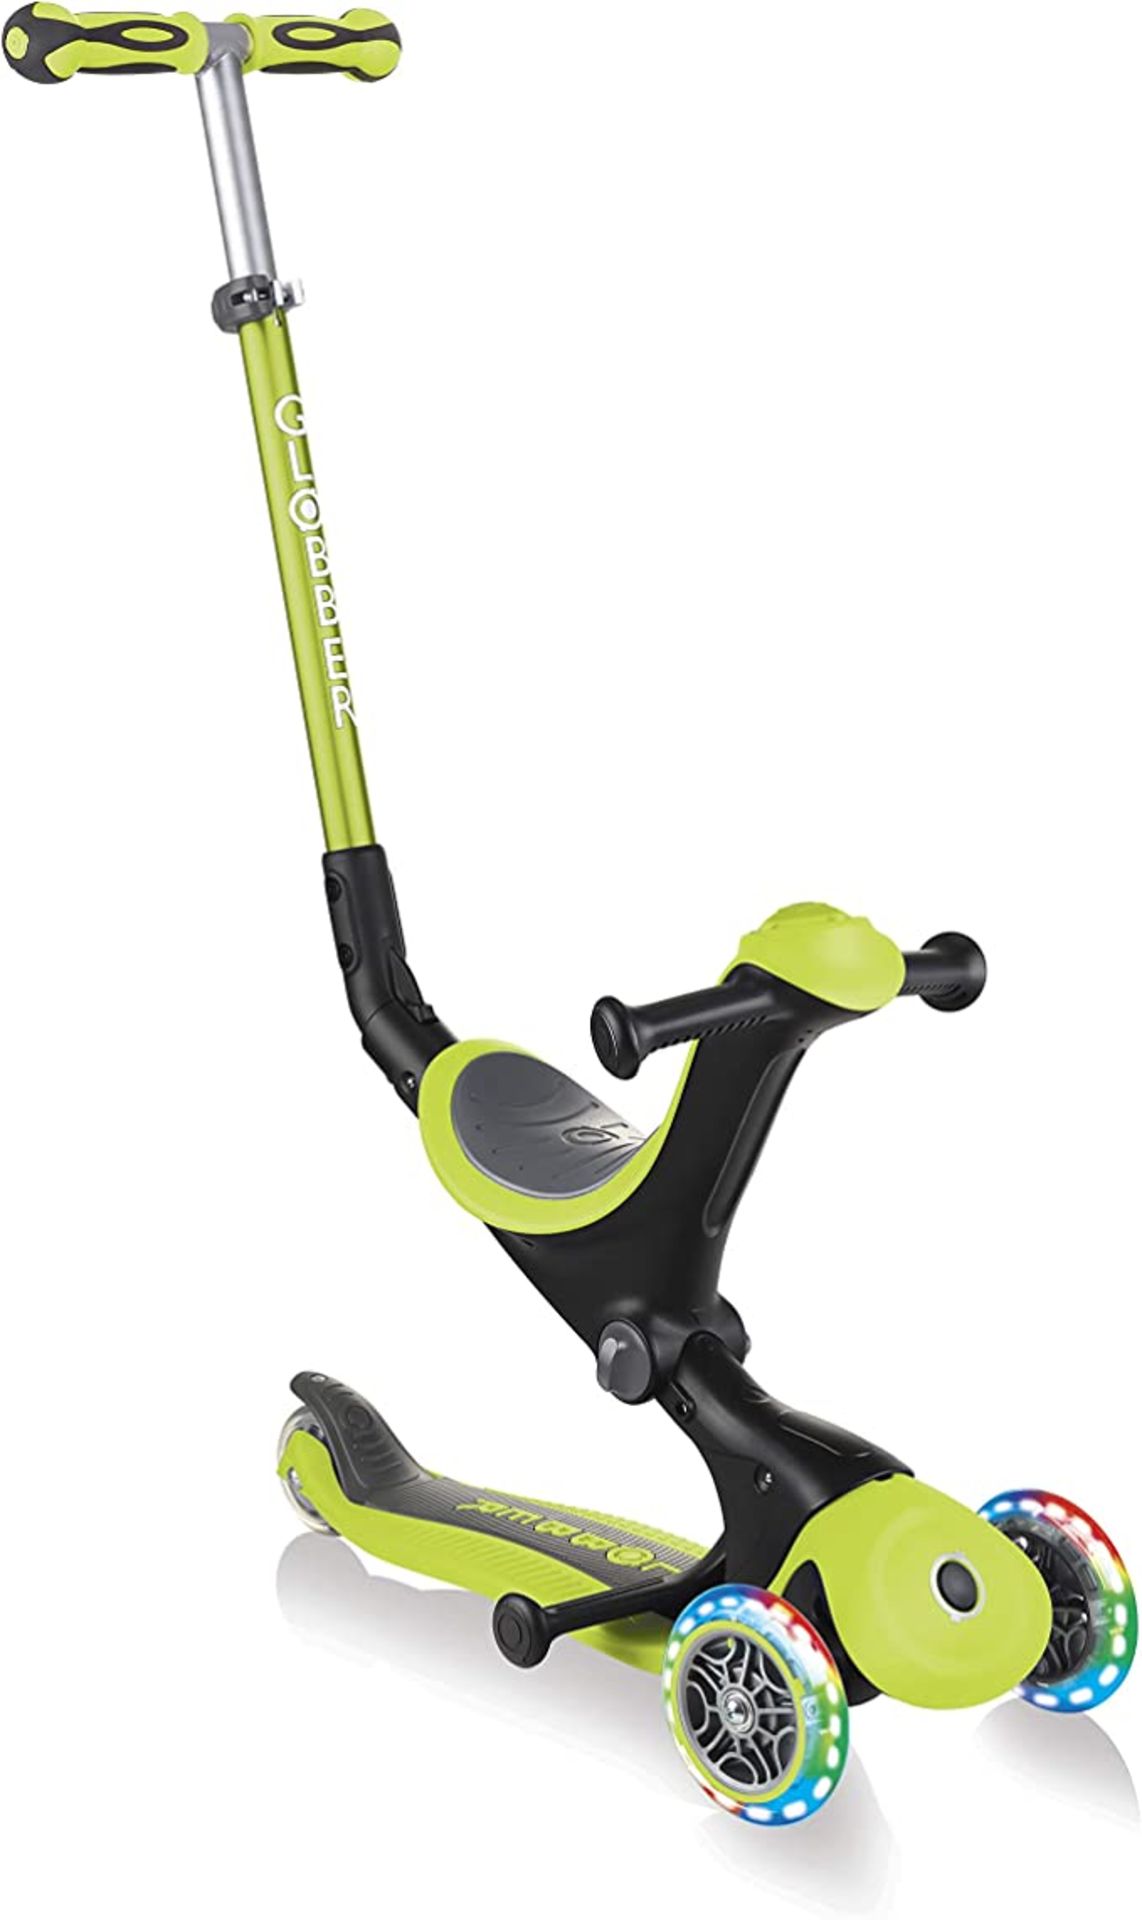 Globber Unisex-Youth Go Up Deluxe Lights Kids Scooter. height adjustable T-Bar and durable TPR